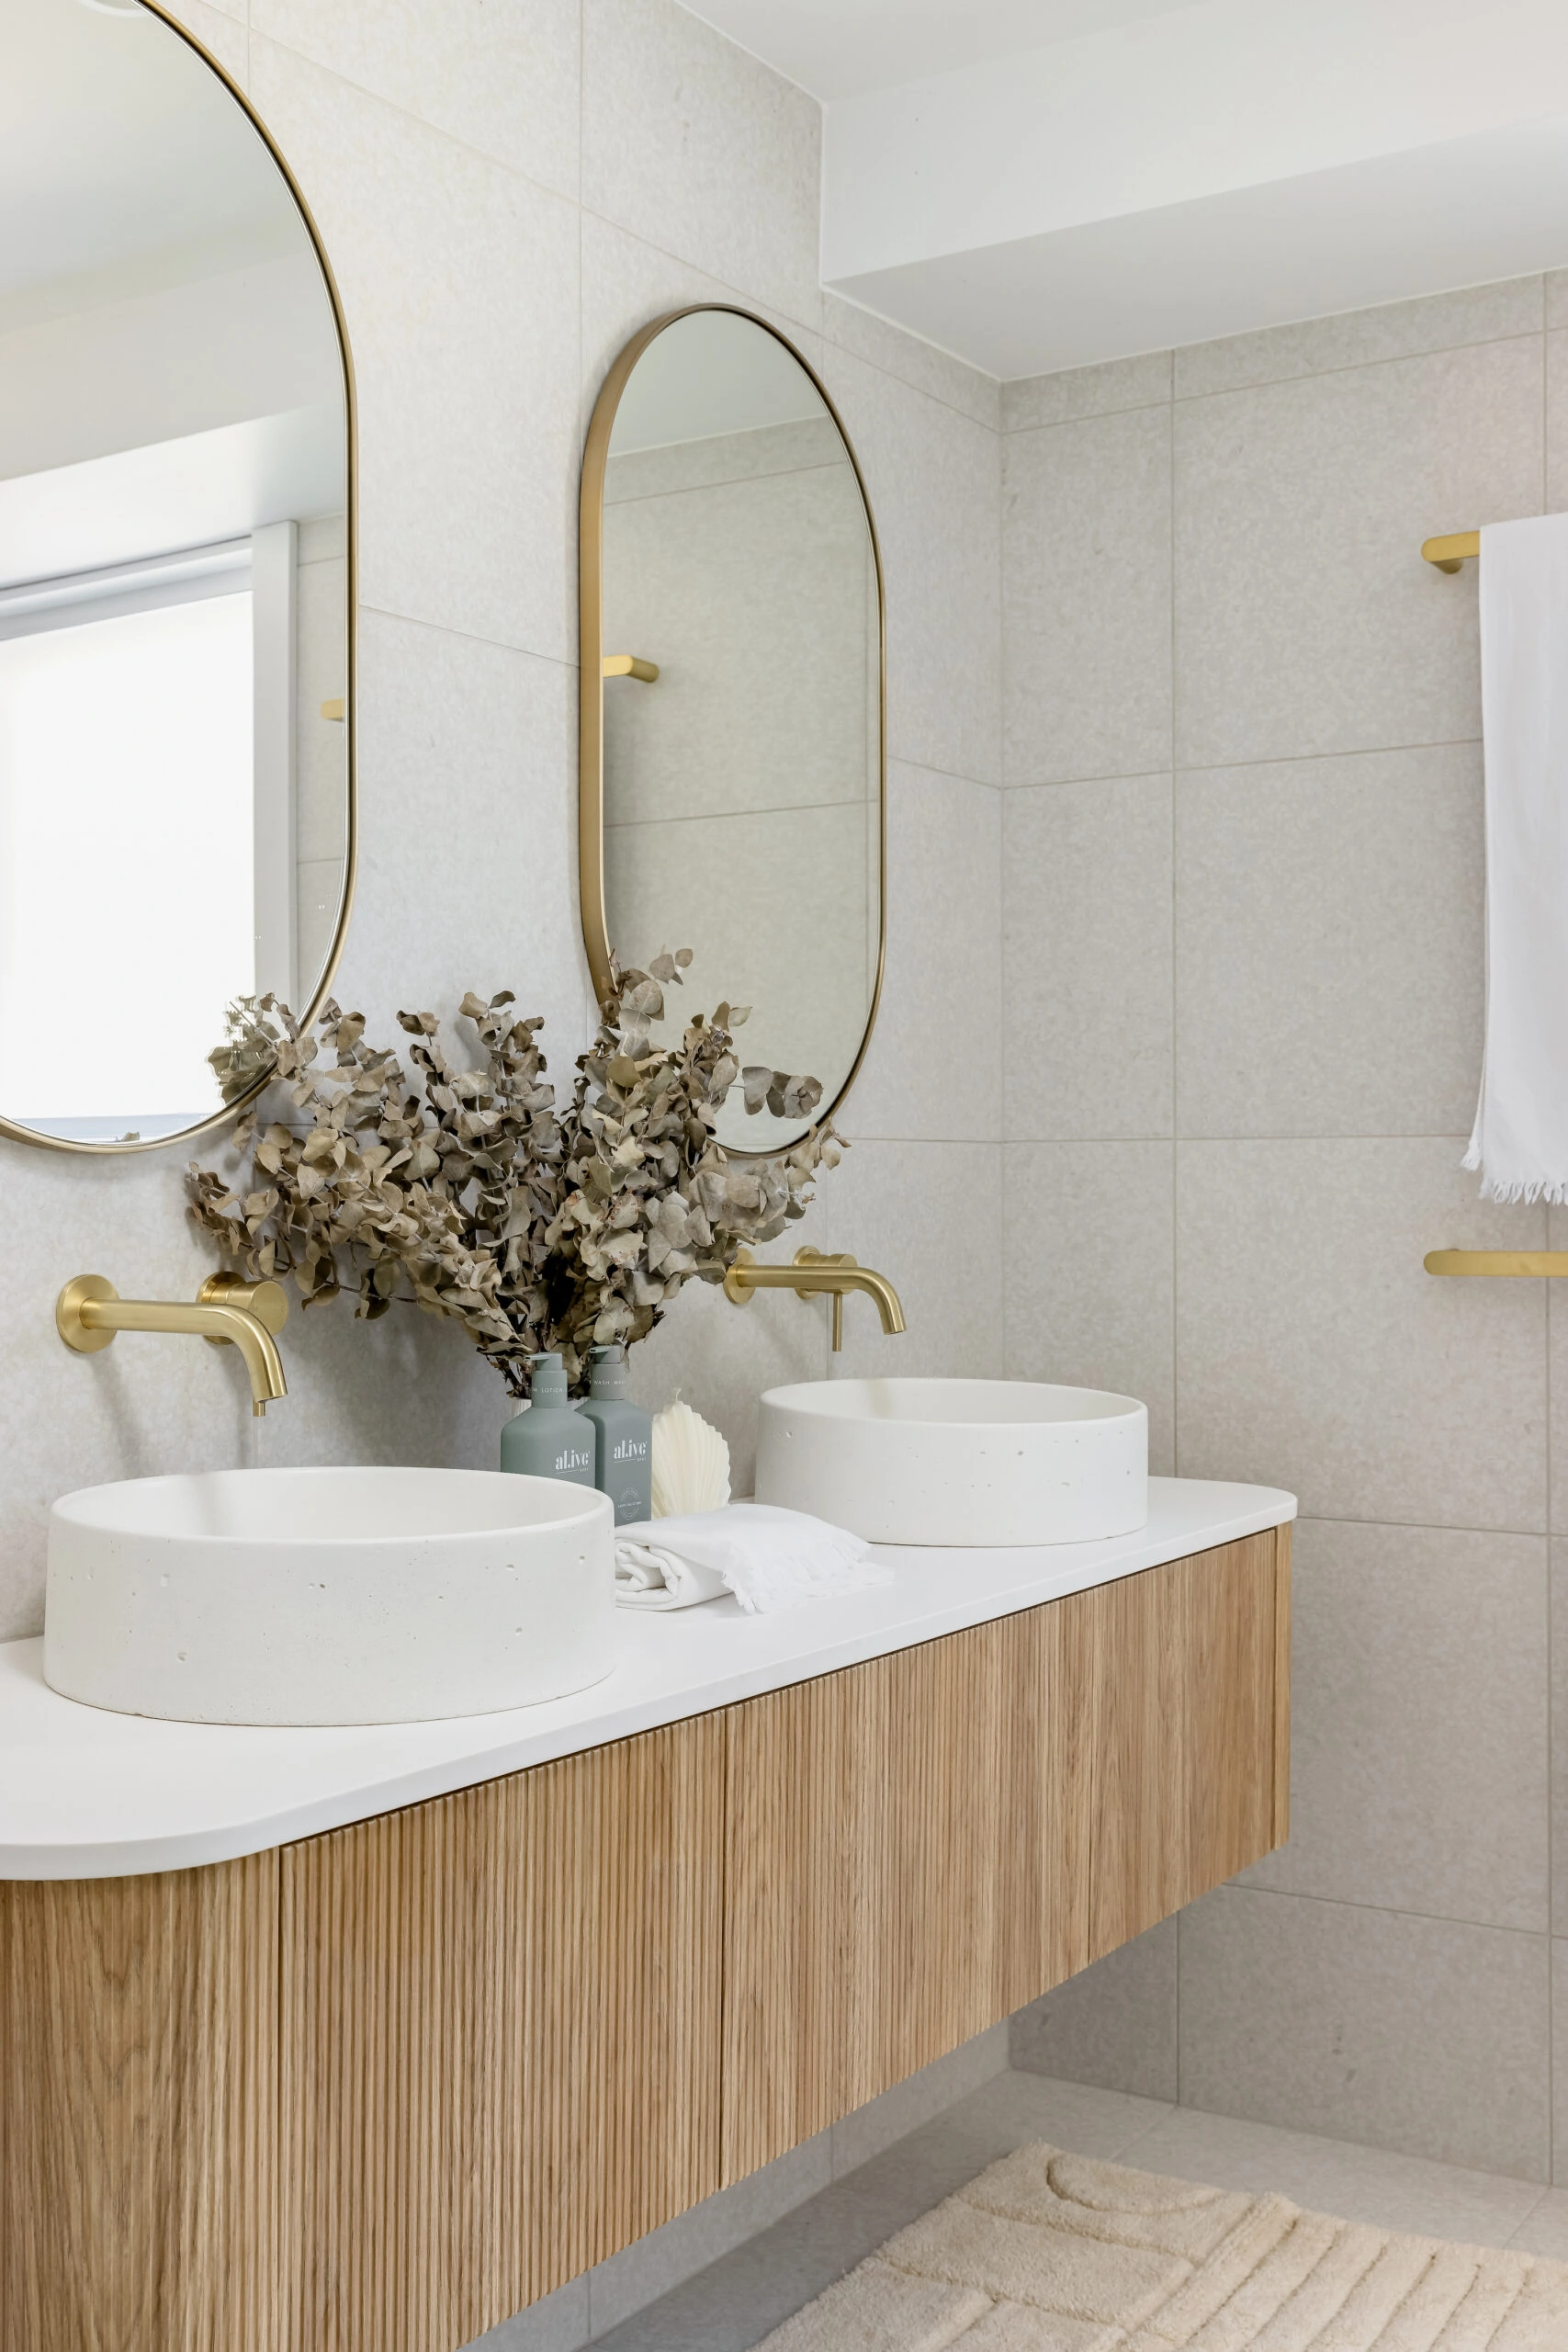 After photograph of a modern bathroom vanity with gold accents.